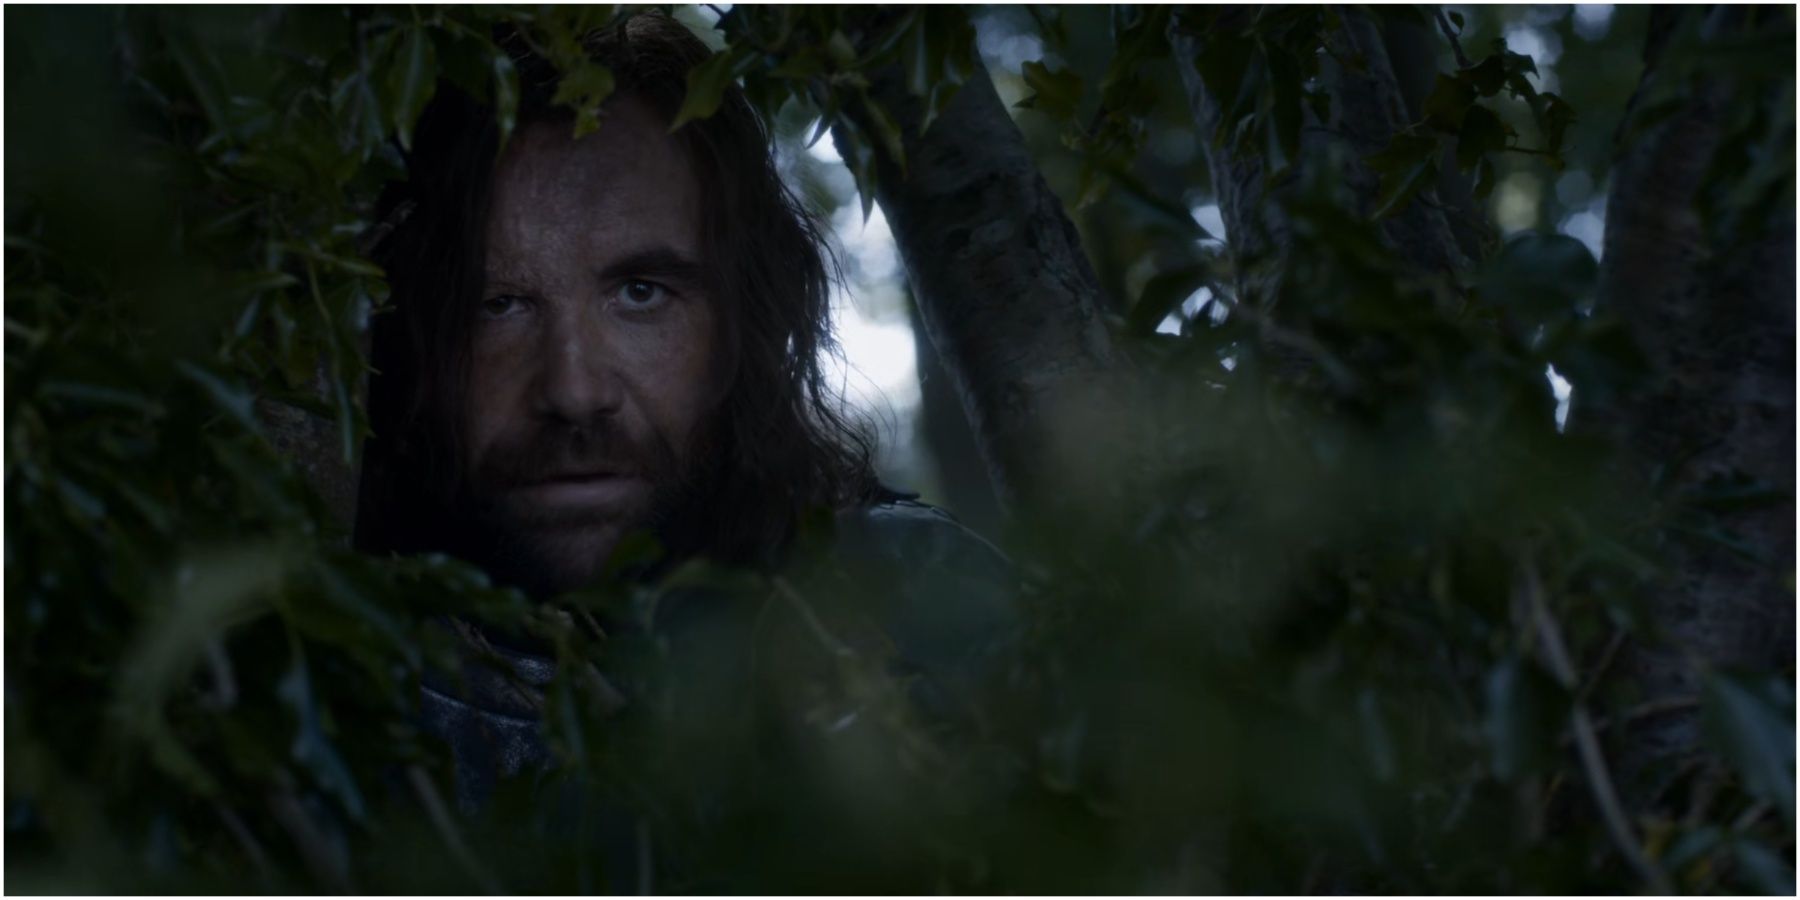 The Hound peeking through bushes in Game of Thrones.